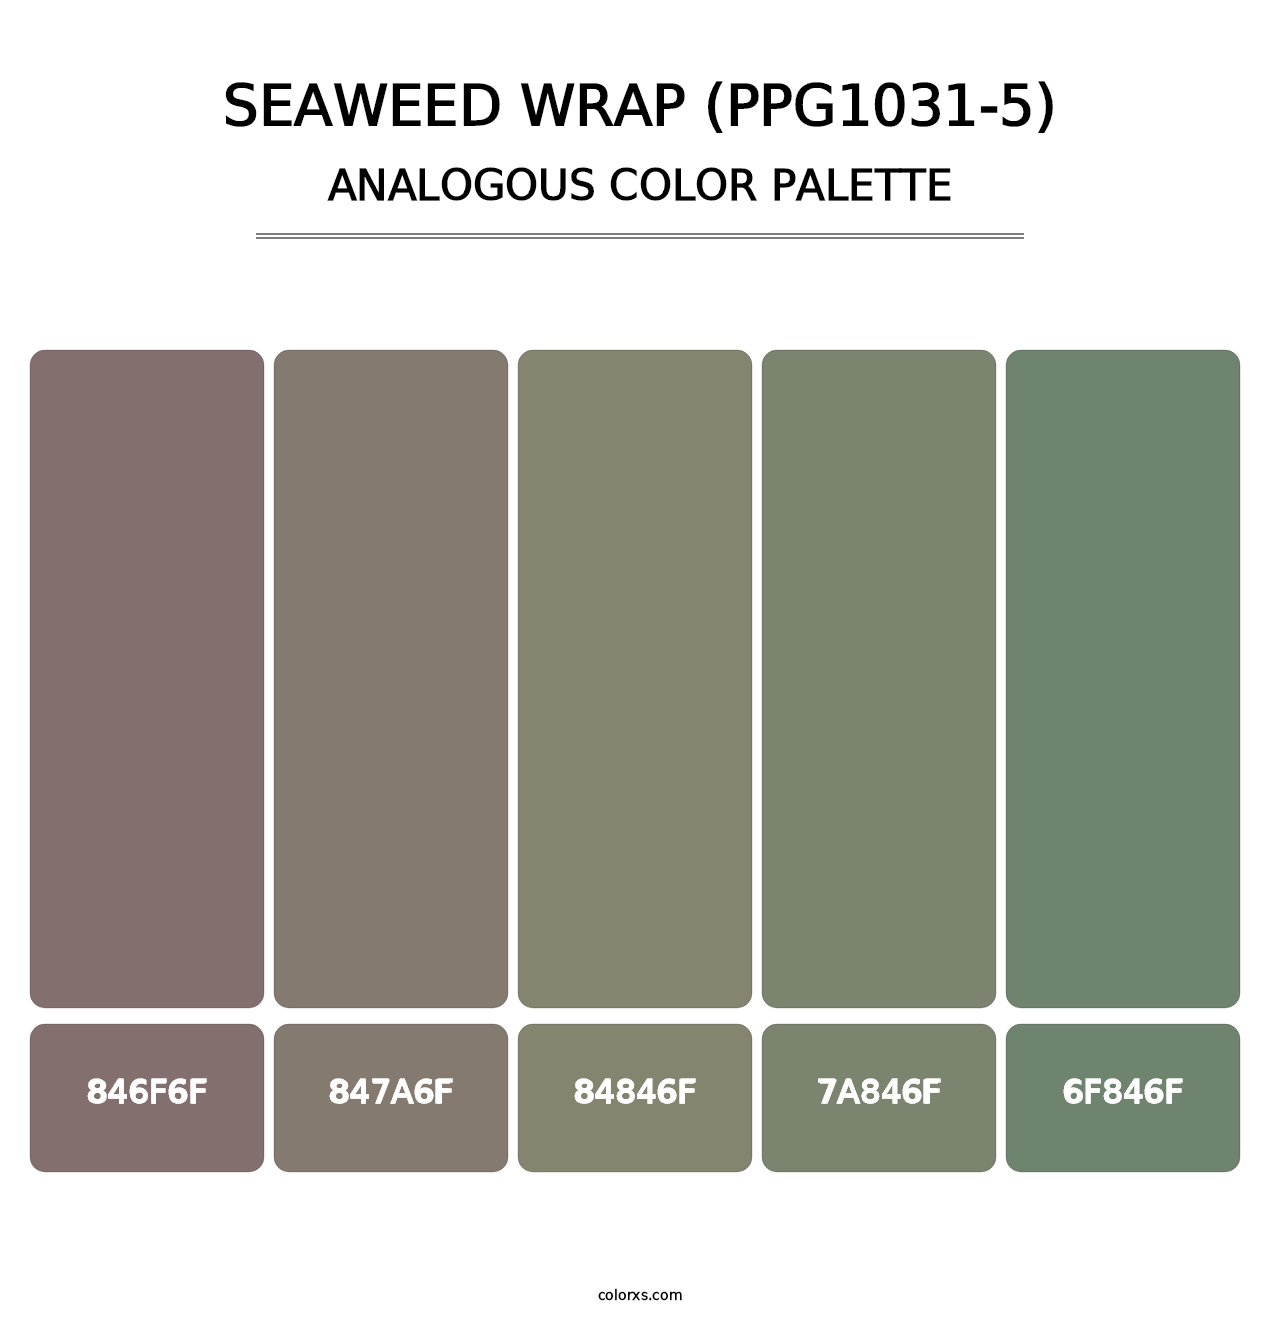 Seaweed Wrap (PPG1031-5) - Analogous Color Palette